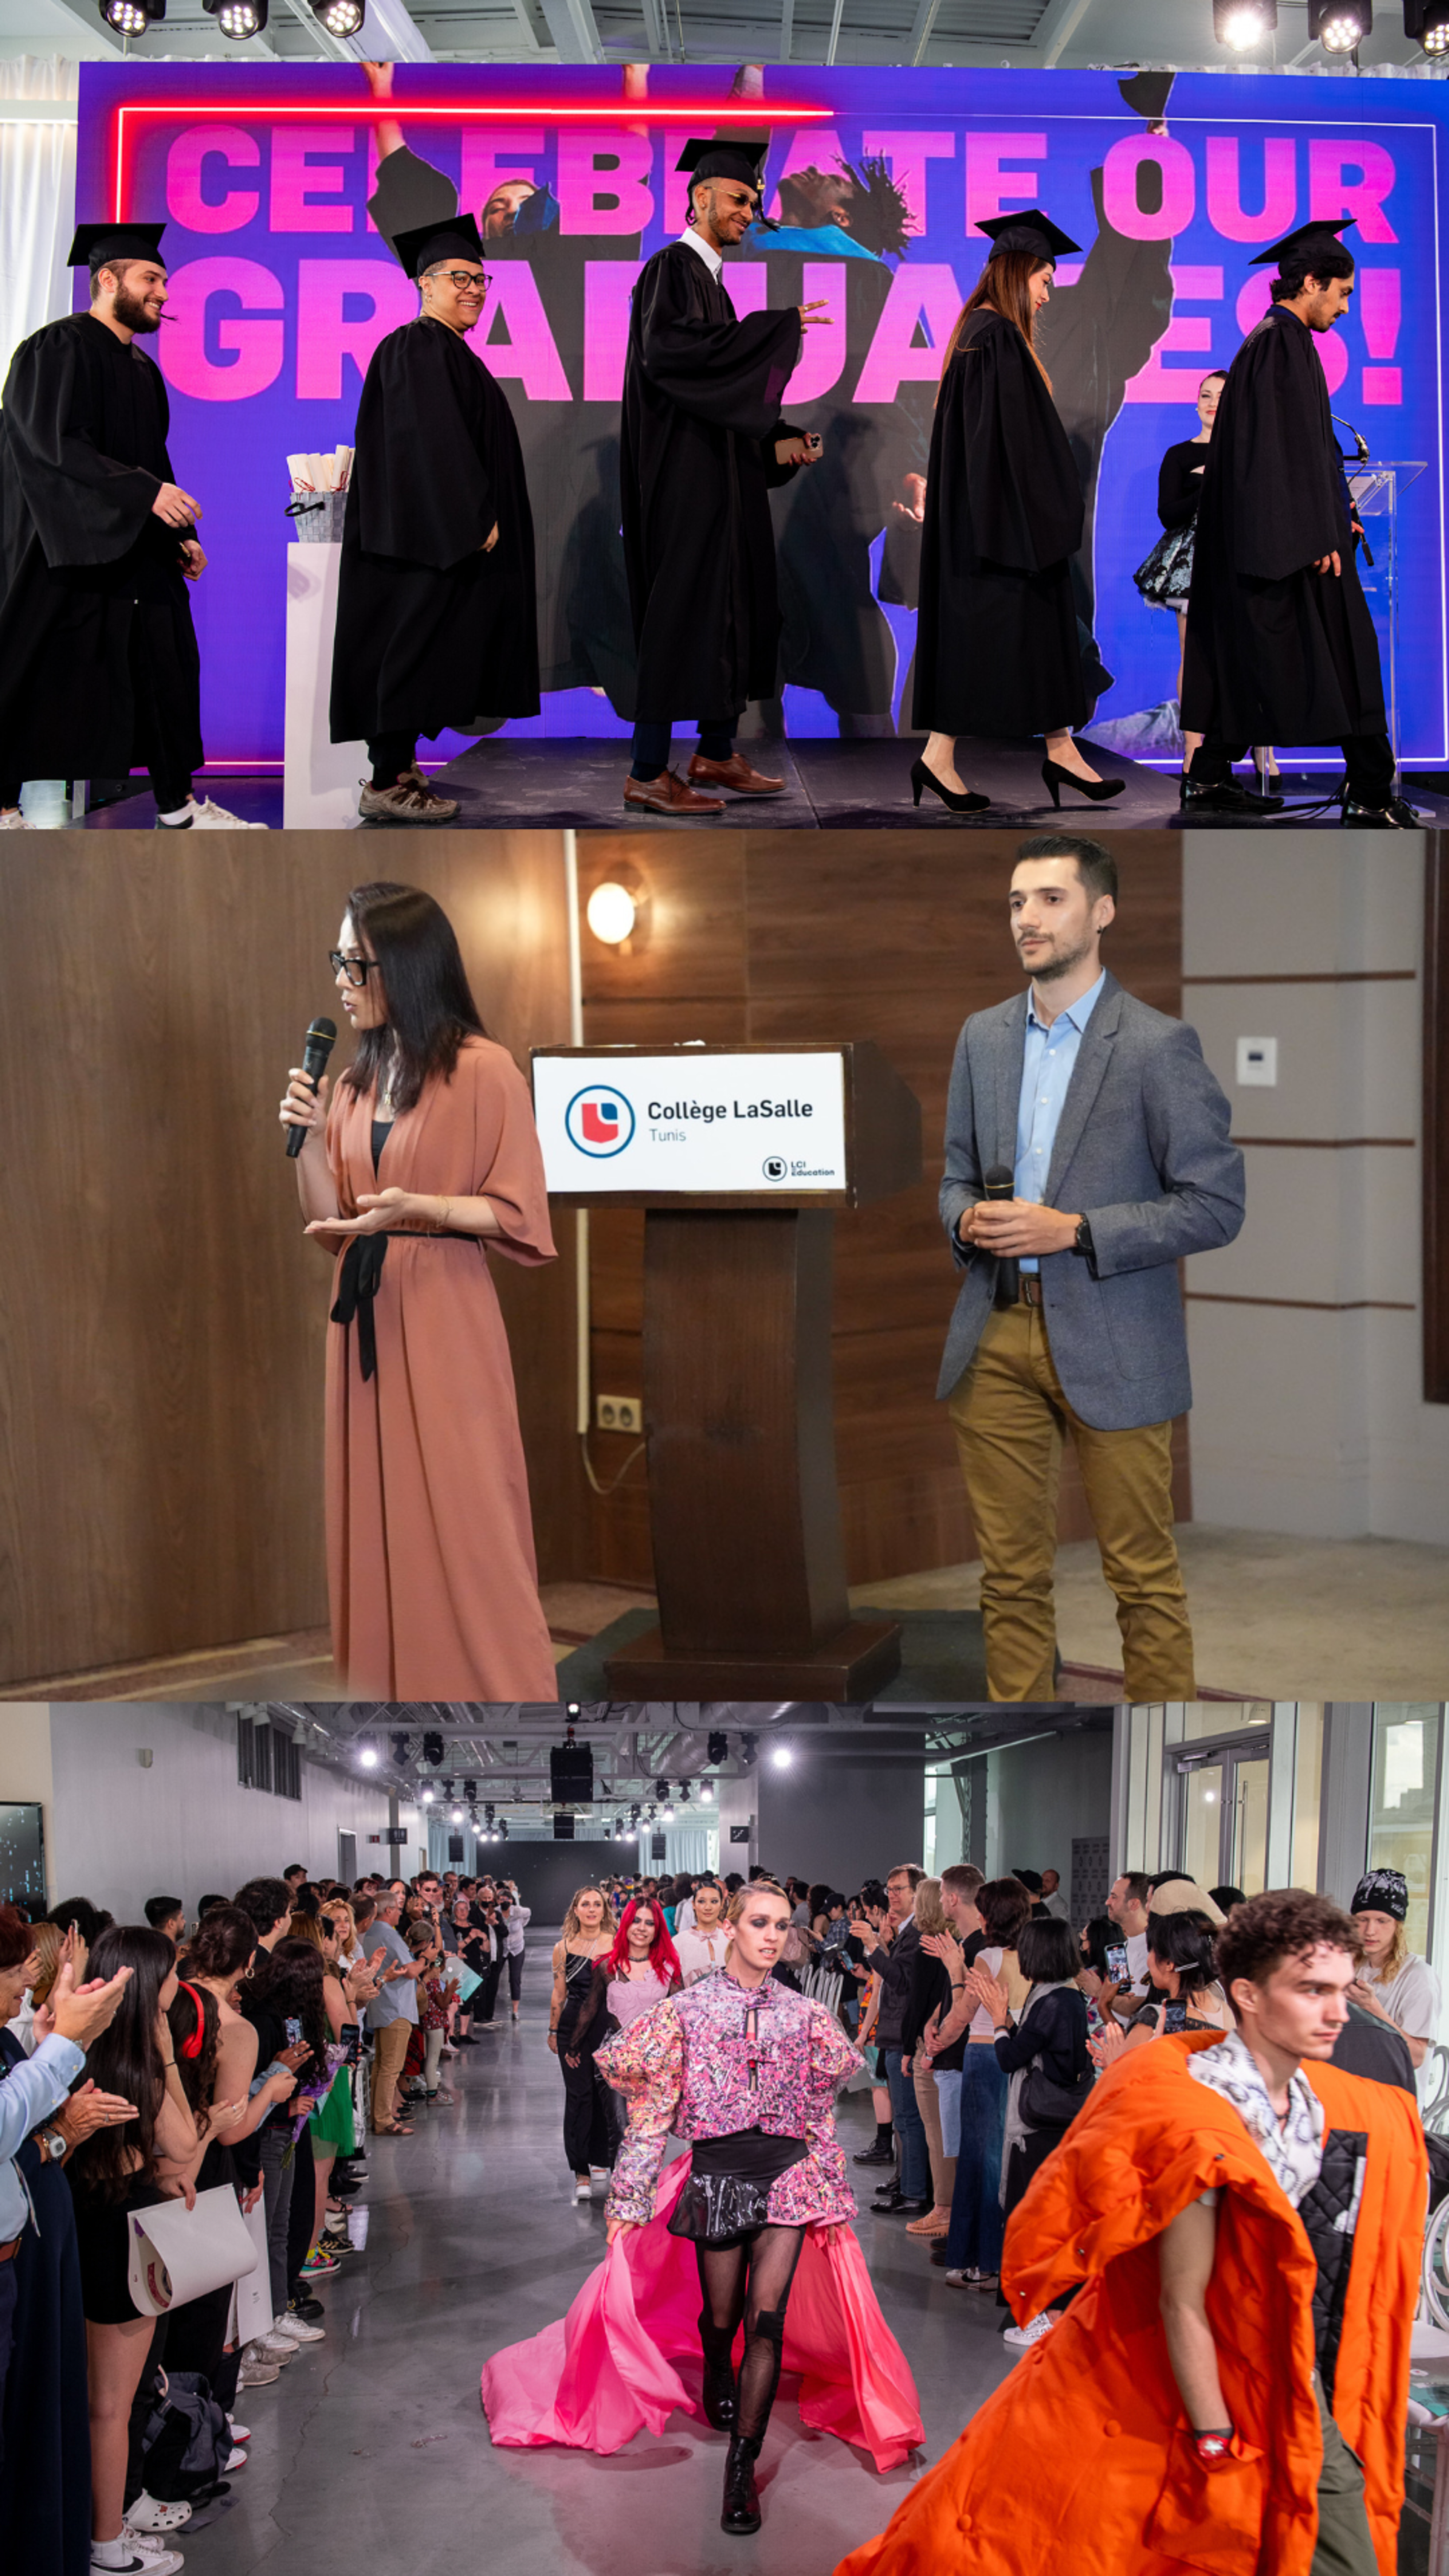 A collage featuring graduates at a ceremony, a speaker at a podium, and models strutting on the runway.